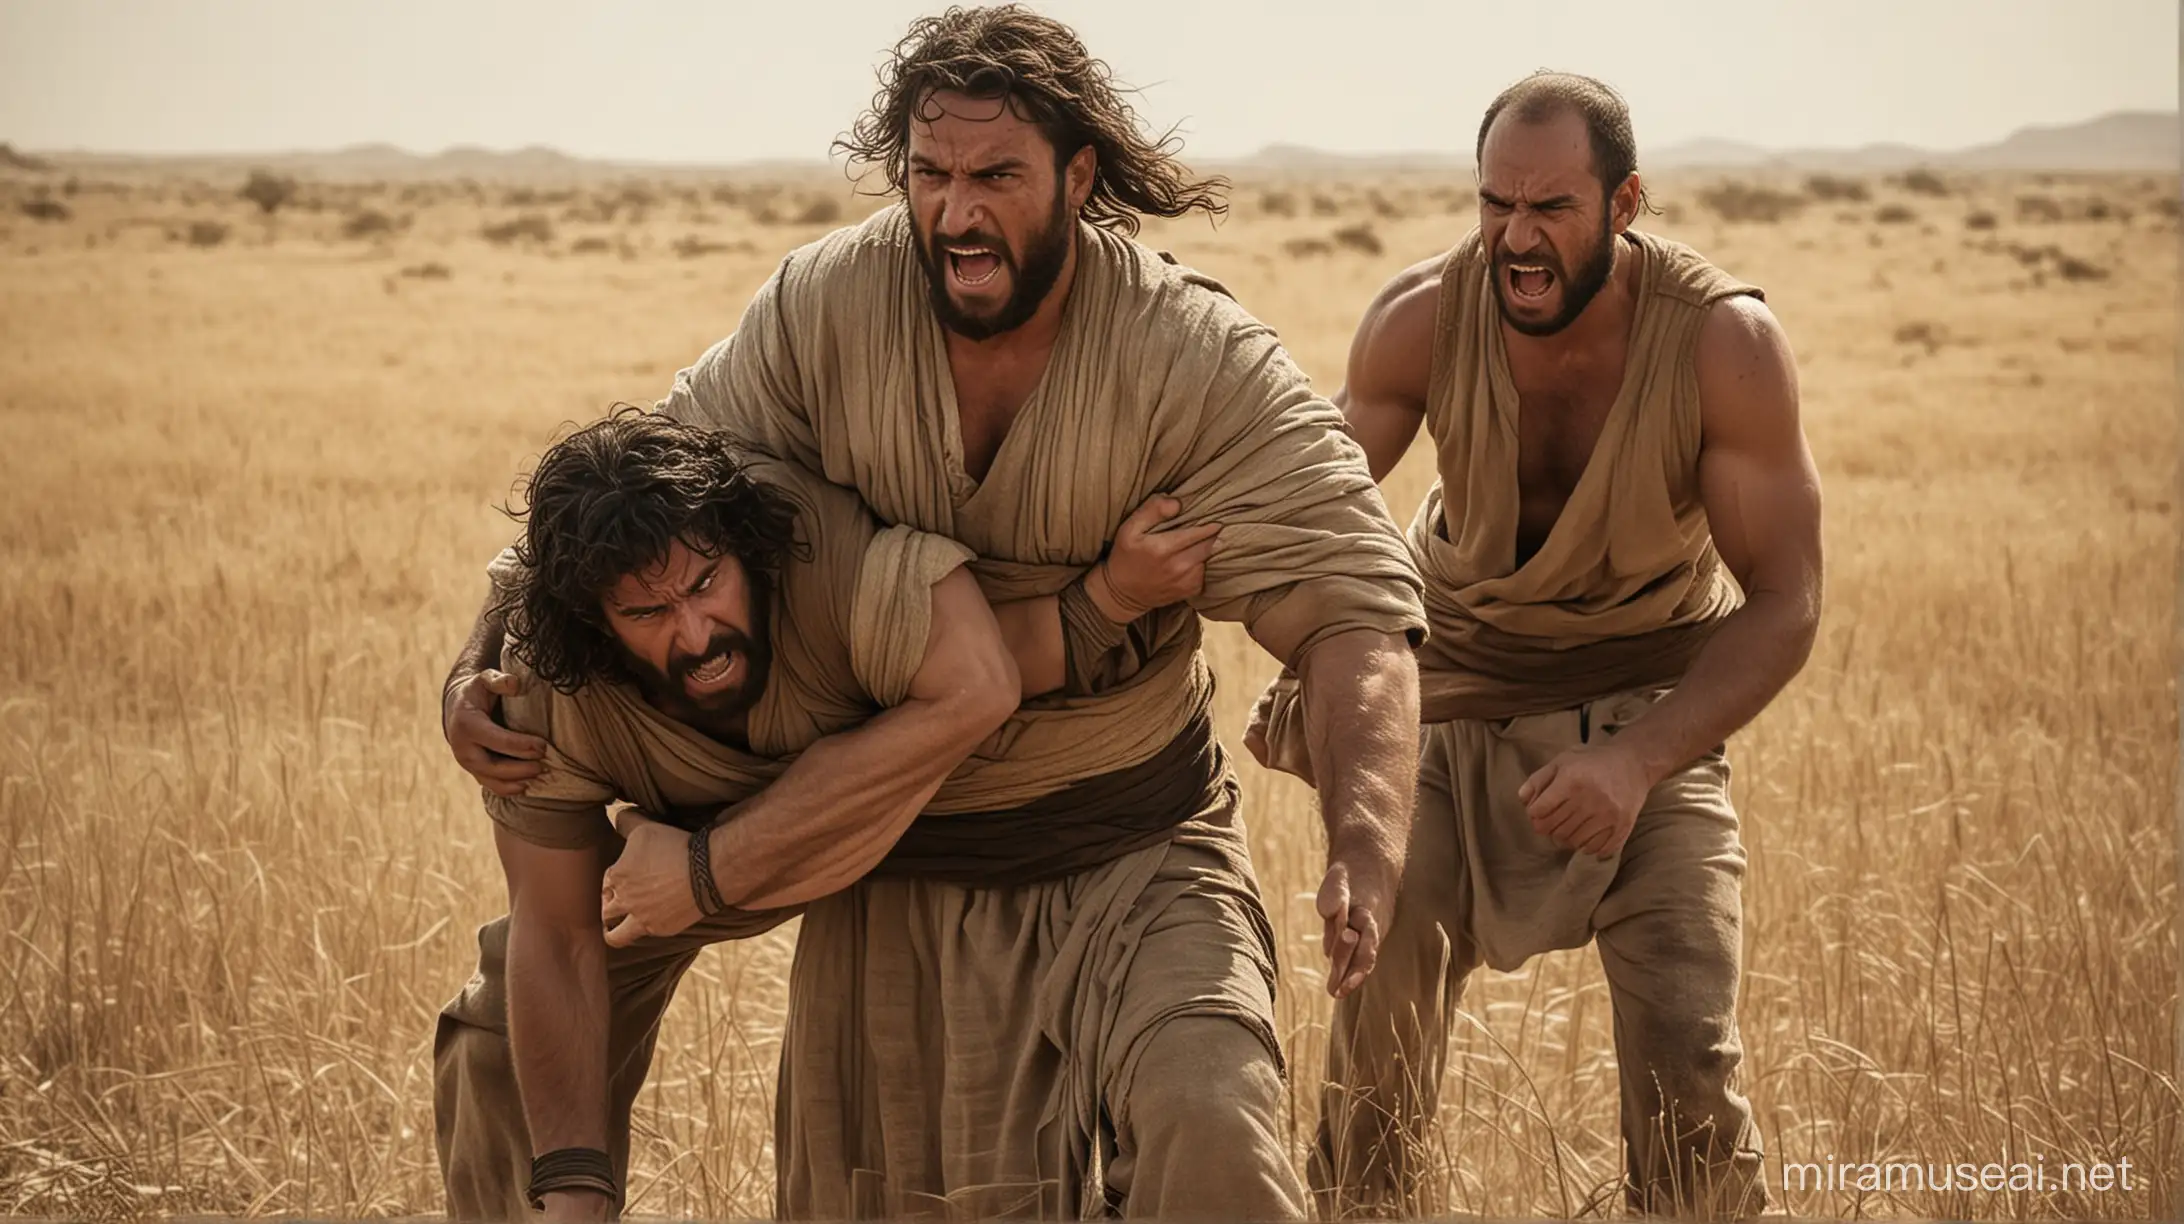 2 men angry with each other, and wrestle in a field. Set in the middle east. During the biblical era of Moses